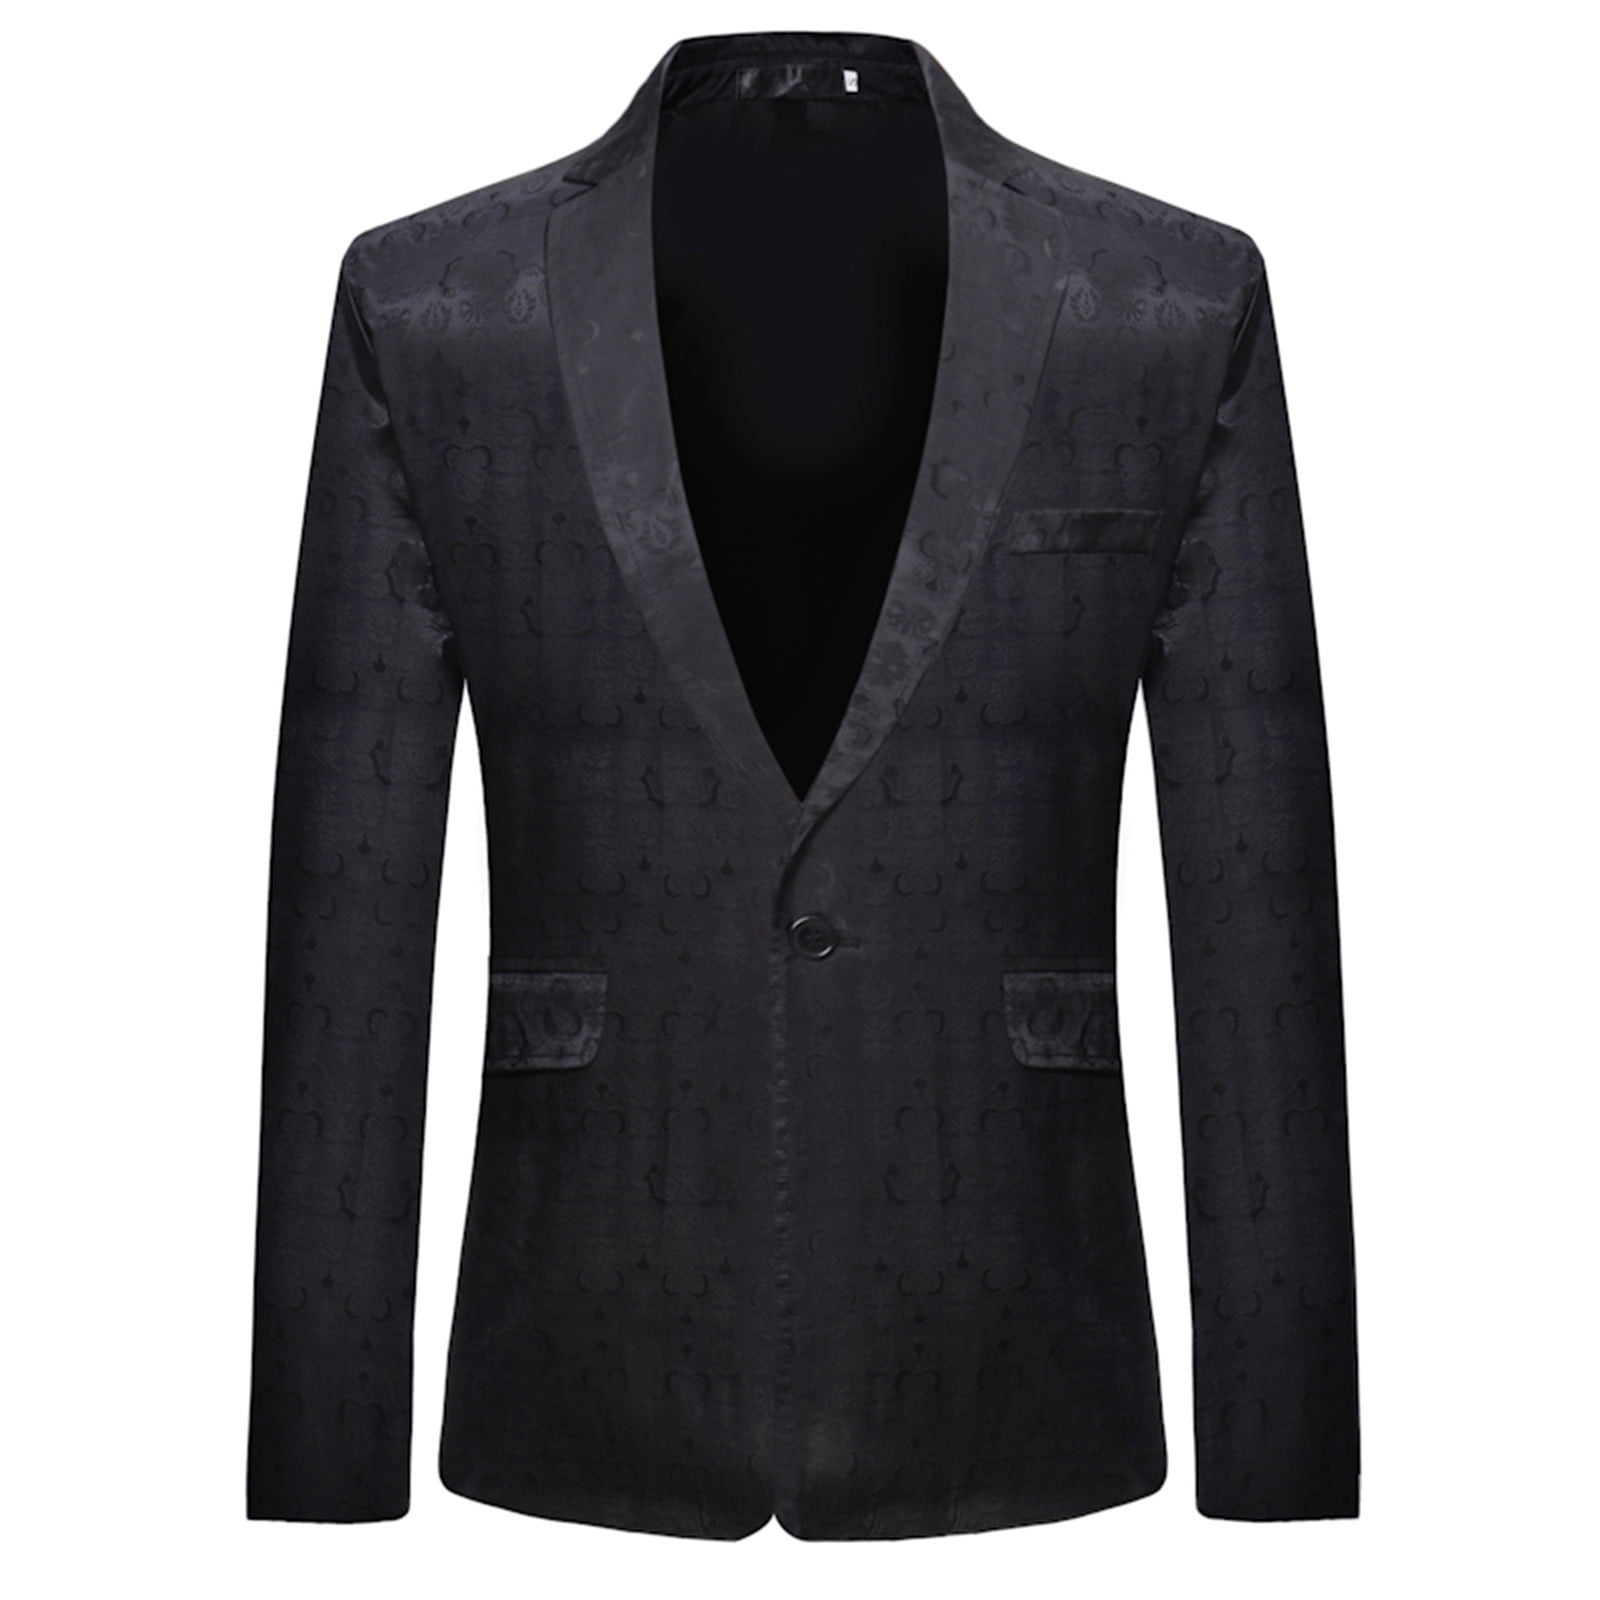 Cathalem Adult Coat Male Coats Big and Tall Mens Suit Jackets Turndown ...